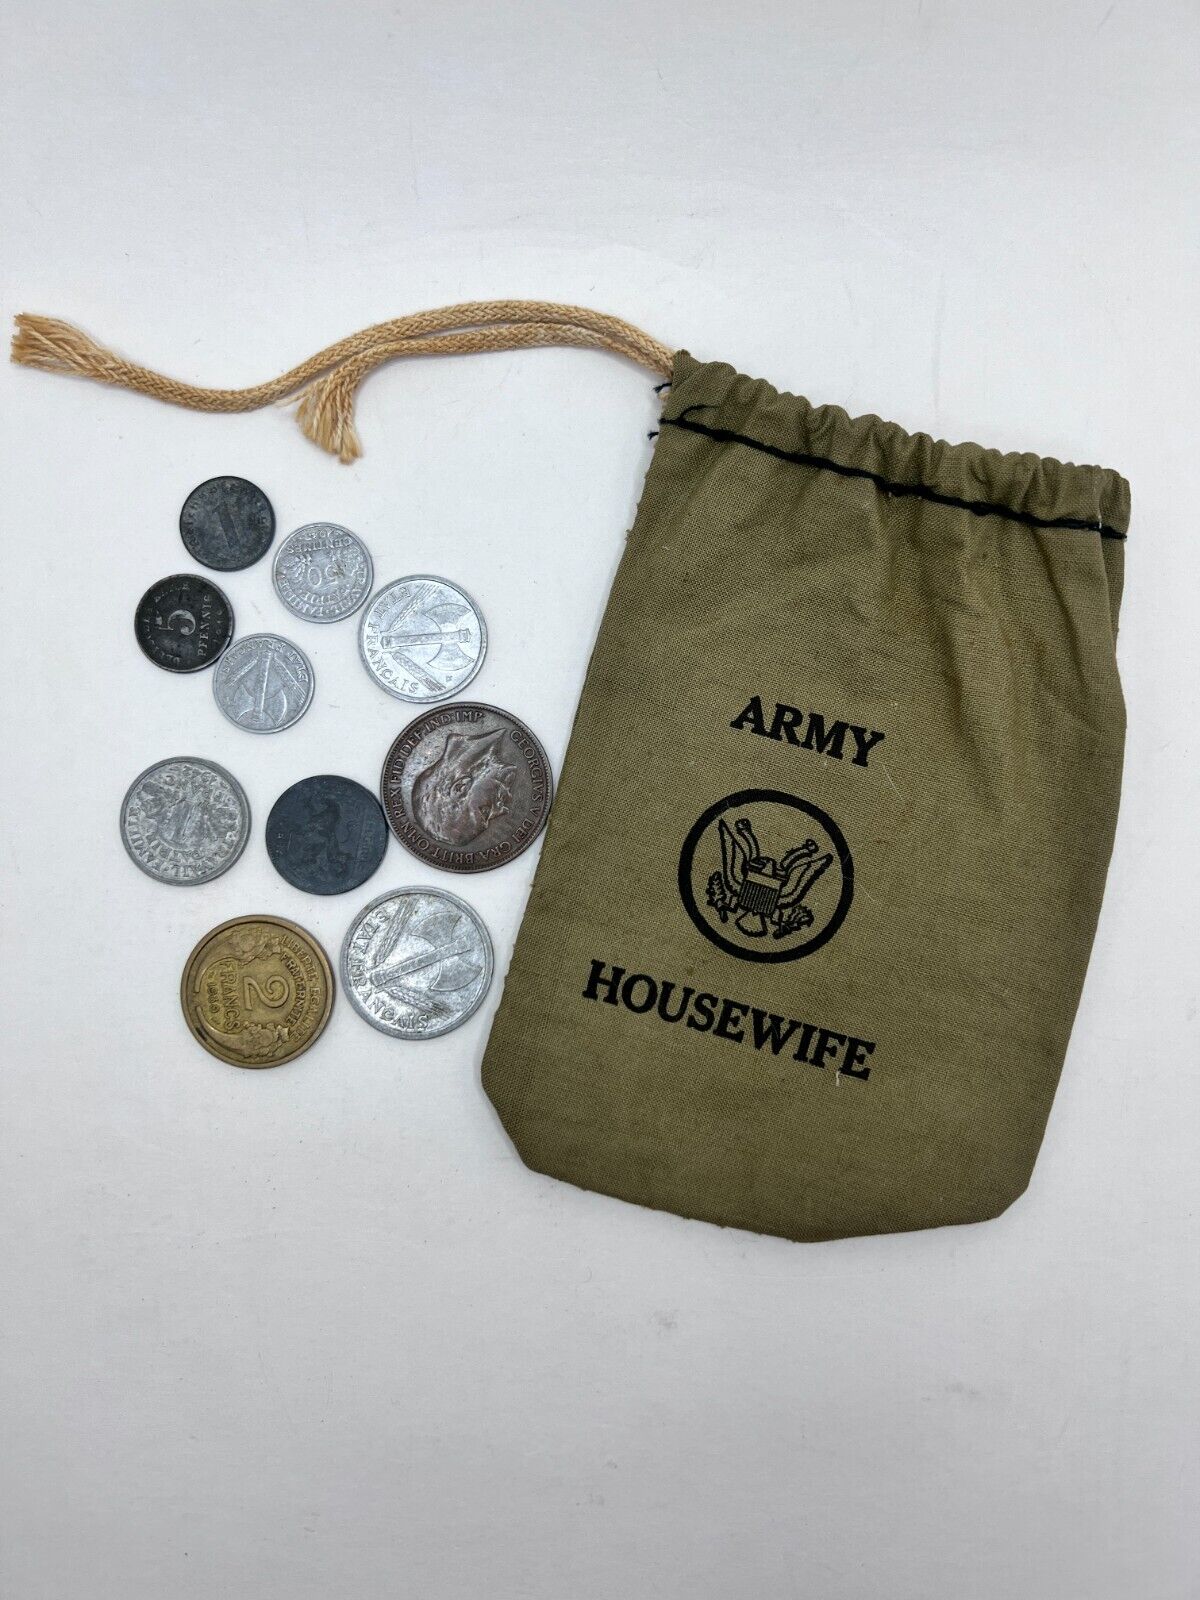 10 Foreign Coins 1940\'s in WWII Army Housewife Coin Bag - Heavily Circulated